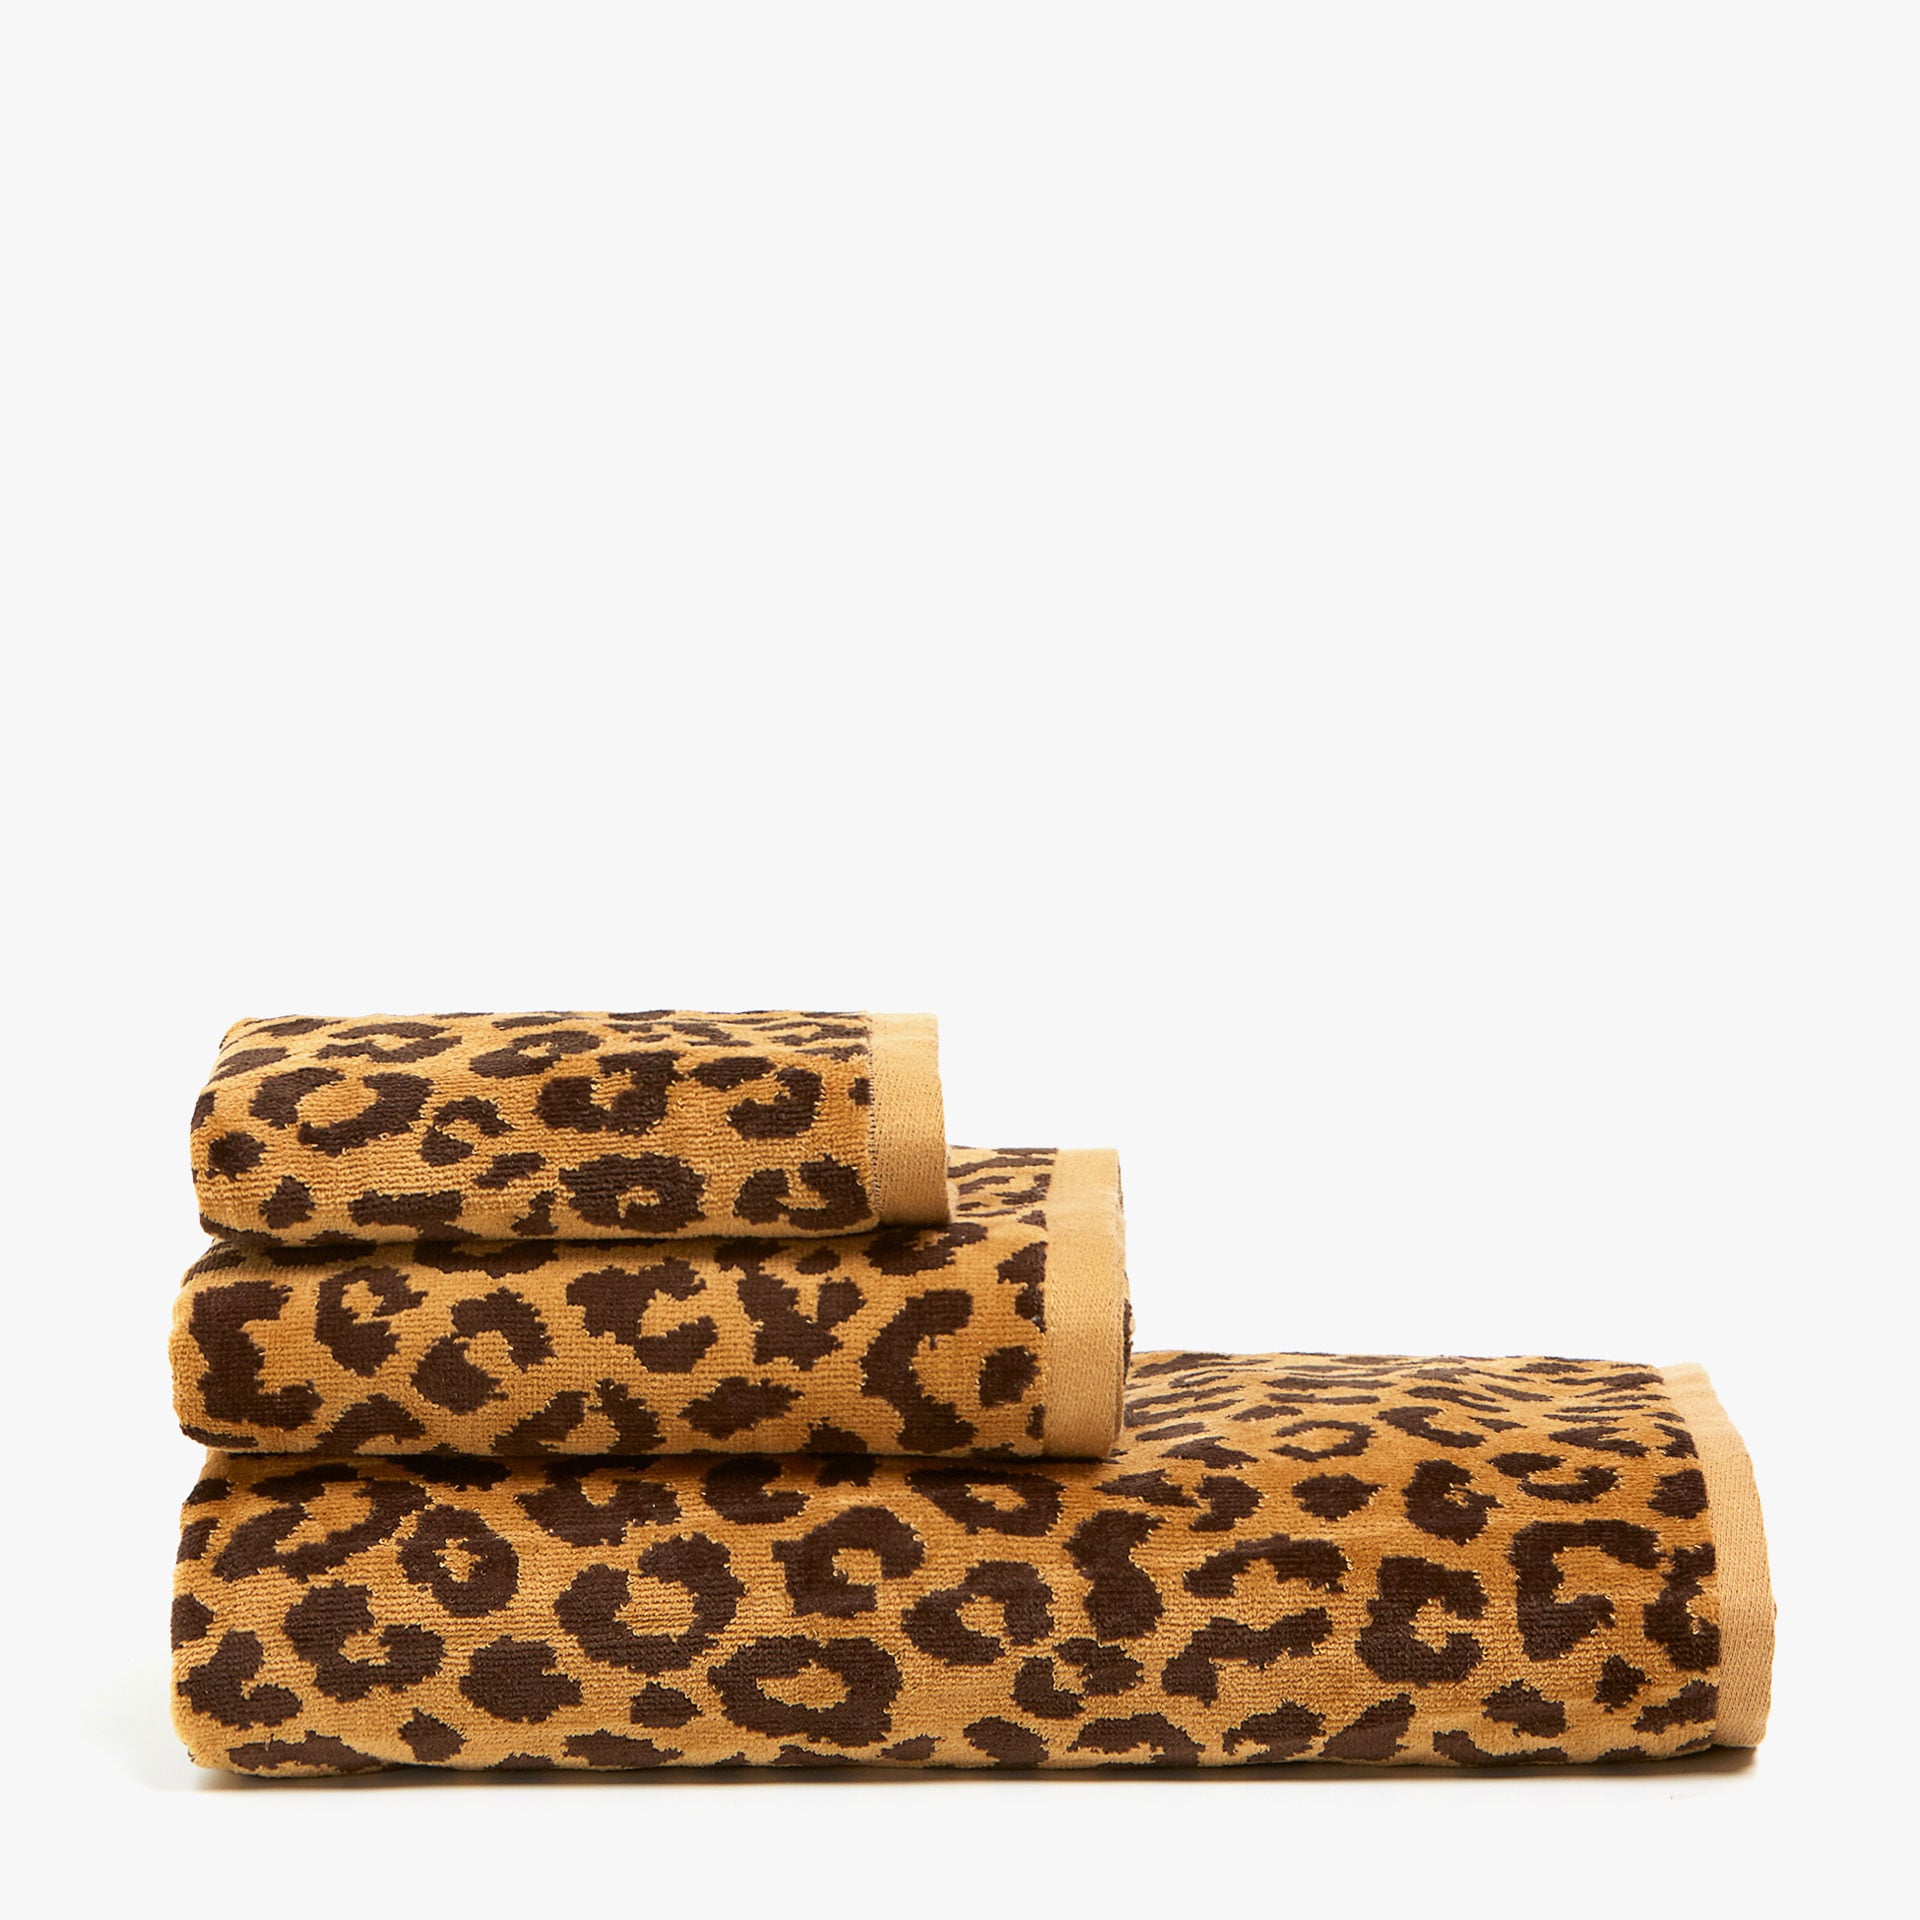 Zara Home Velvety Cotton Towels With Leopard Print | 31 Chic Fashion Gifts  That'll Cost You No More Than $50 | POPSUGAR Fashion Photo 12